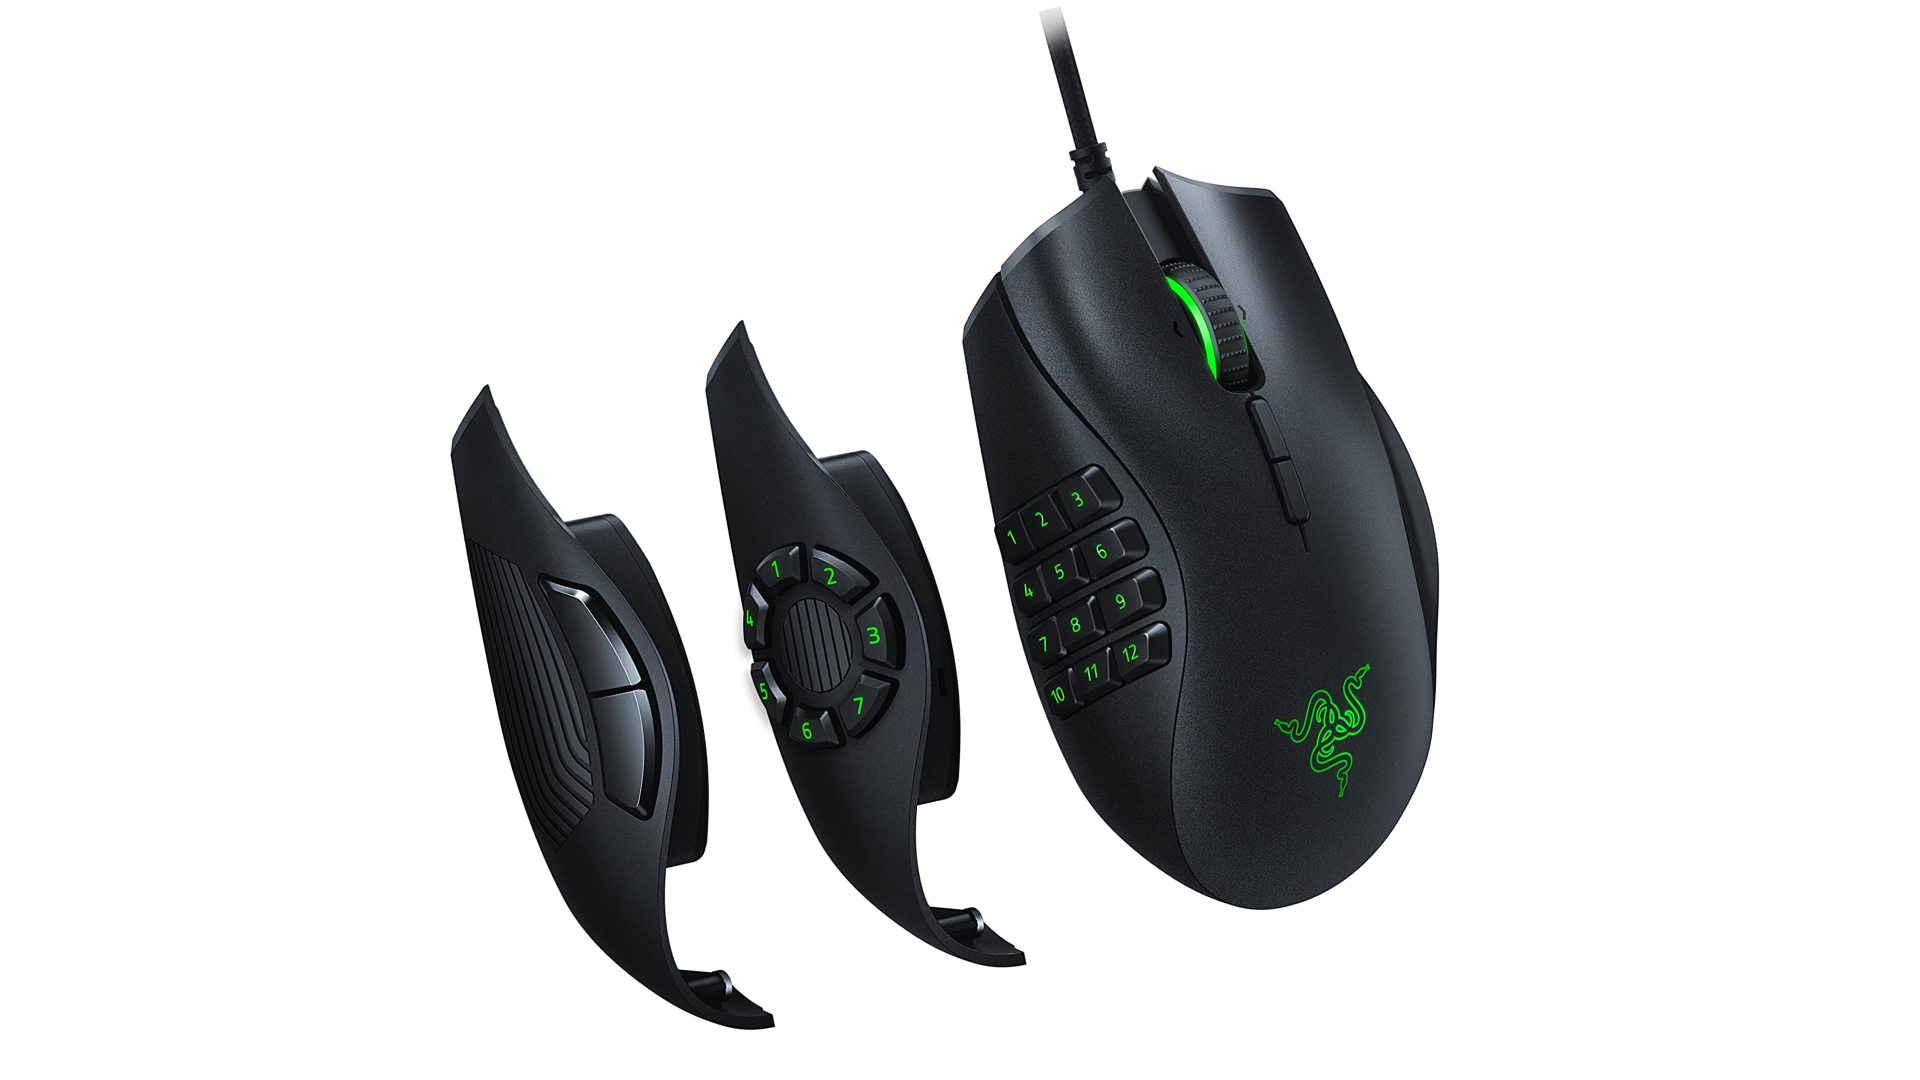 Grab 40% off our favourite Razer gaming mouse for MMORPGs